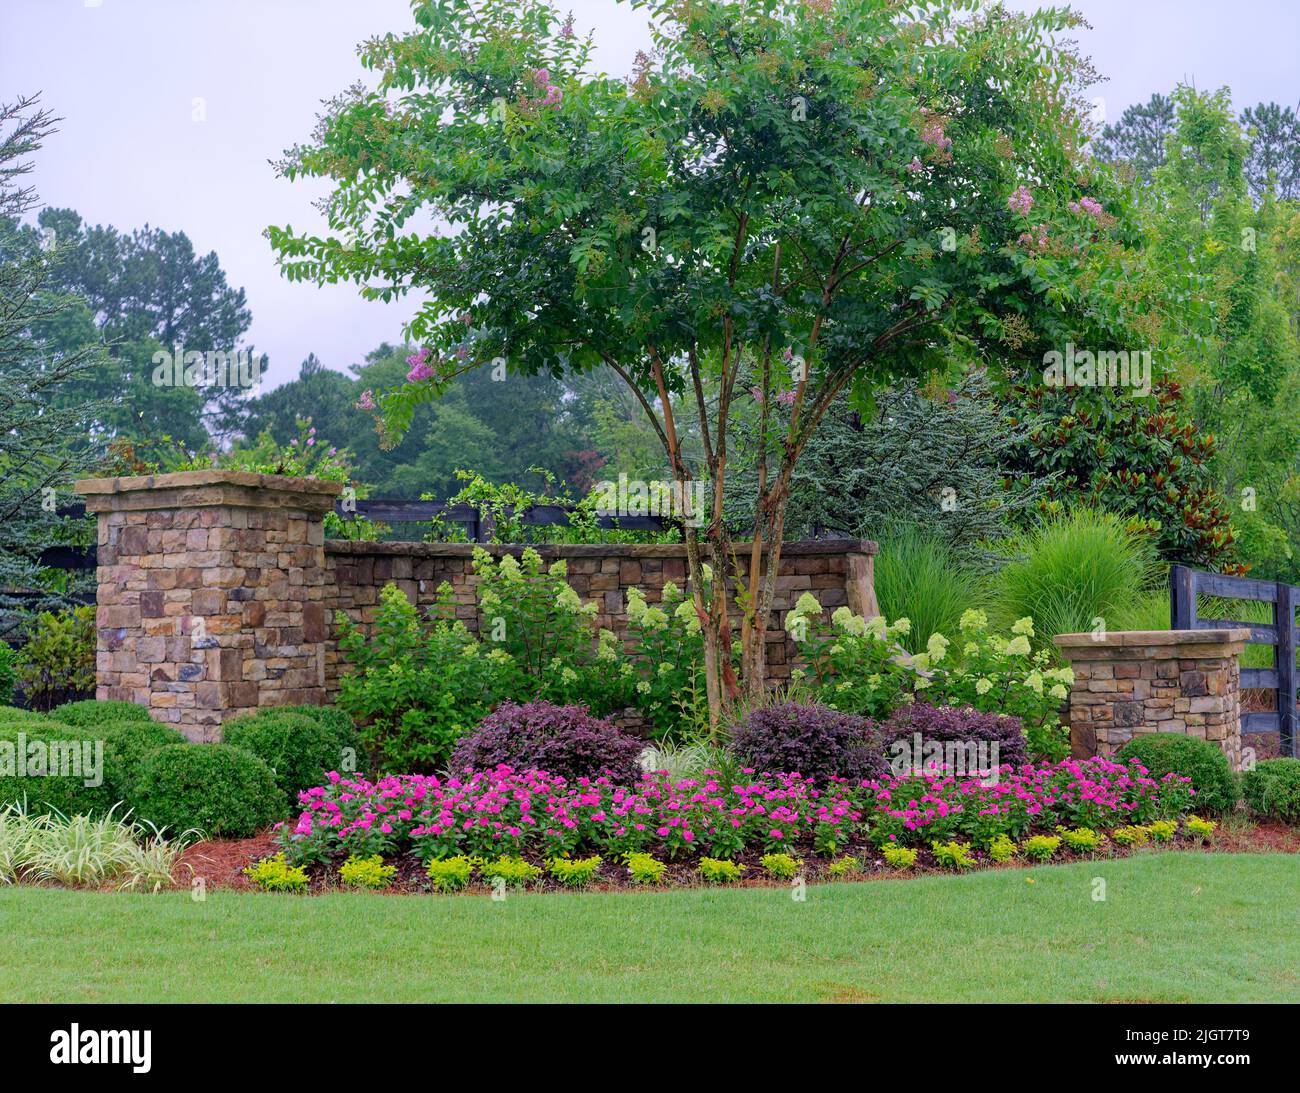 Landscaped Entrance to Residential Neighborhood Stock Photo